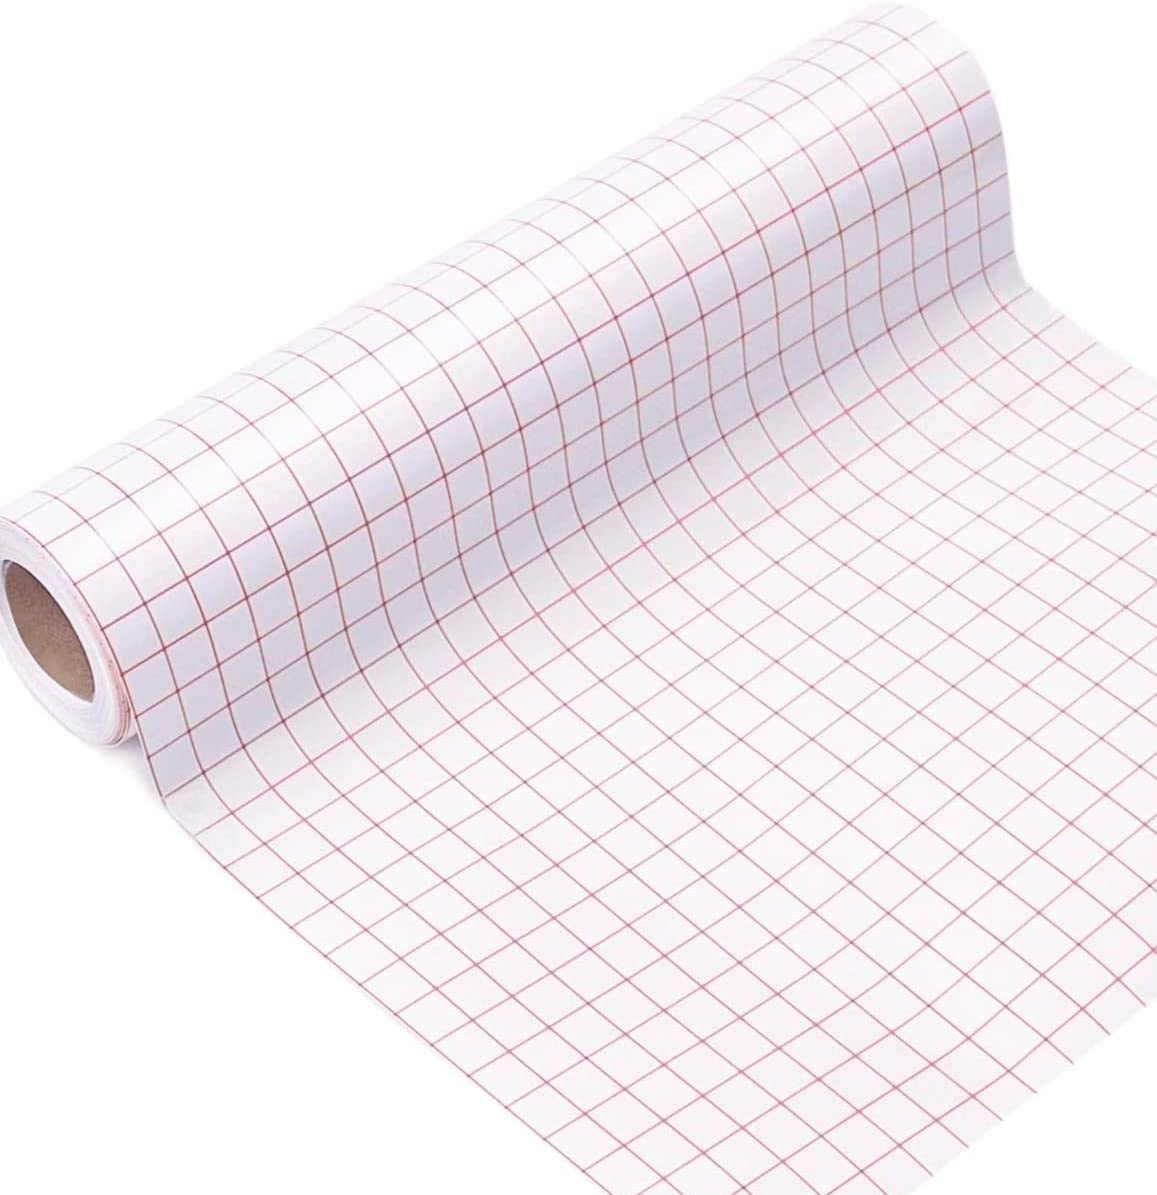 Vinyl Transfer Tape 6 x 50FT Craft Application Paper w/ Red Grid for Cricut